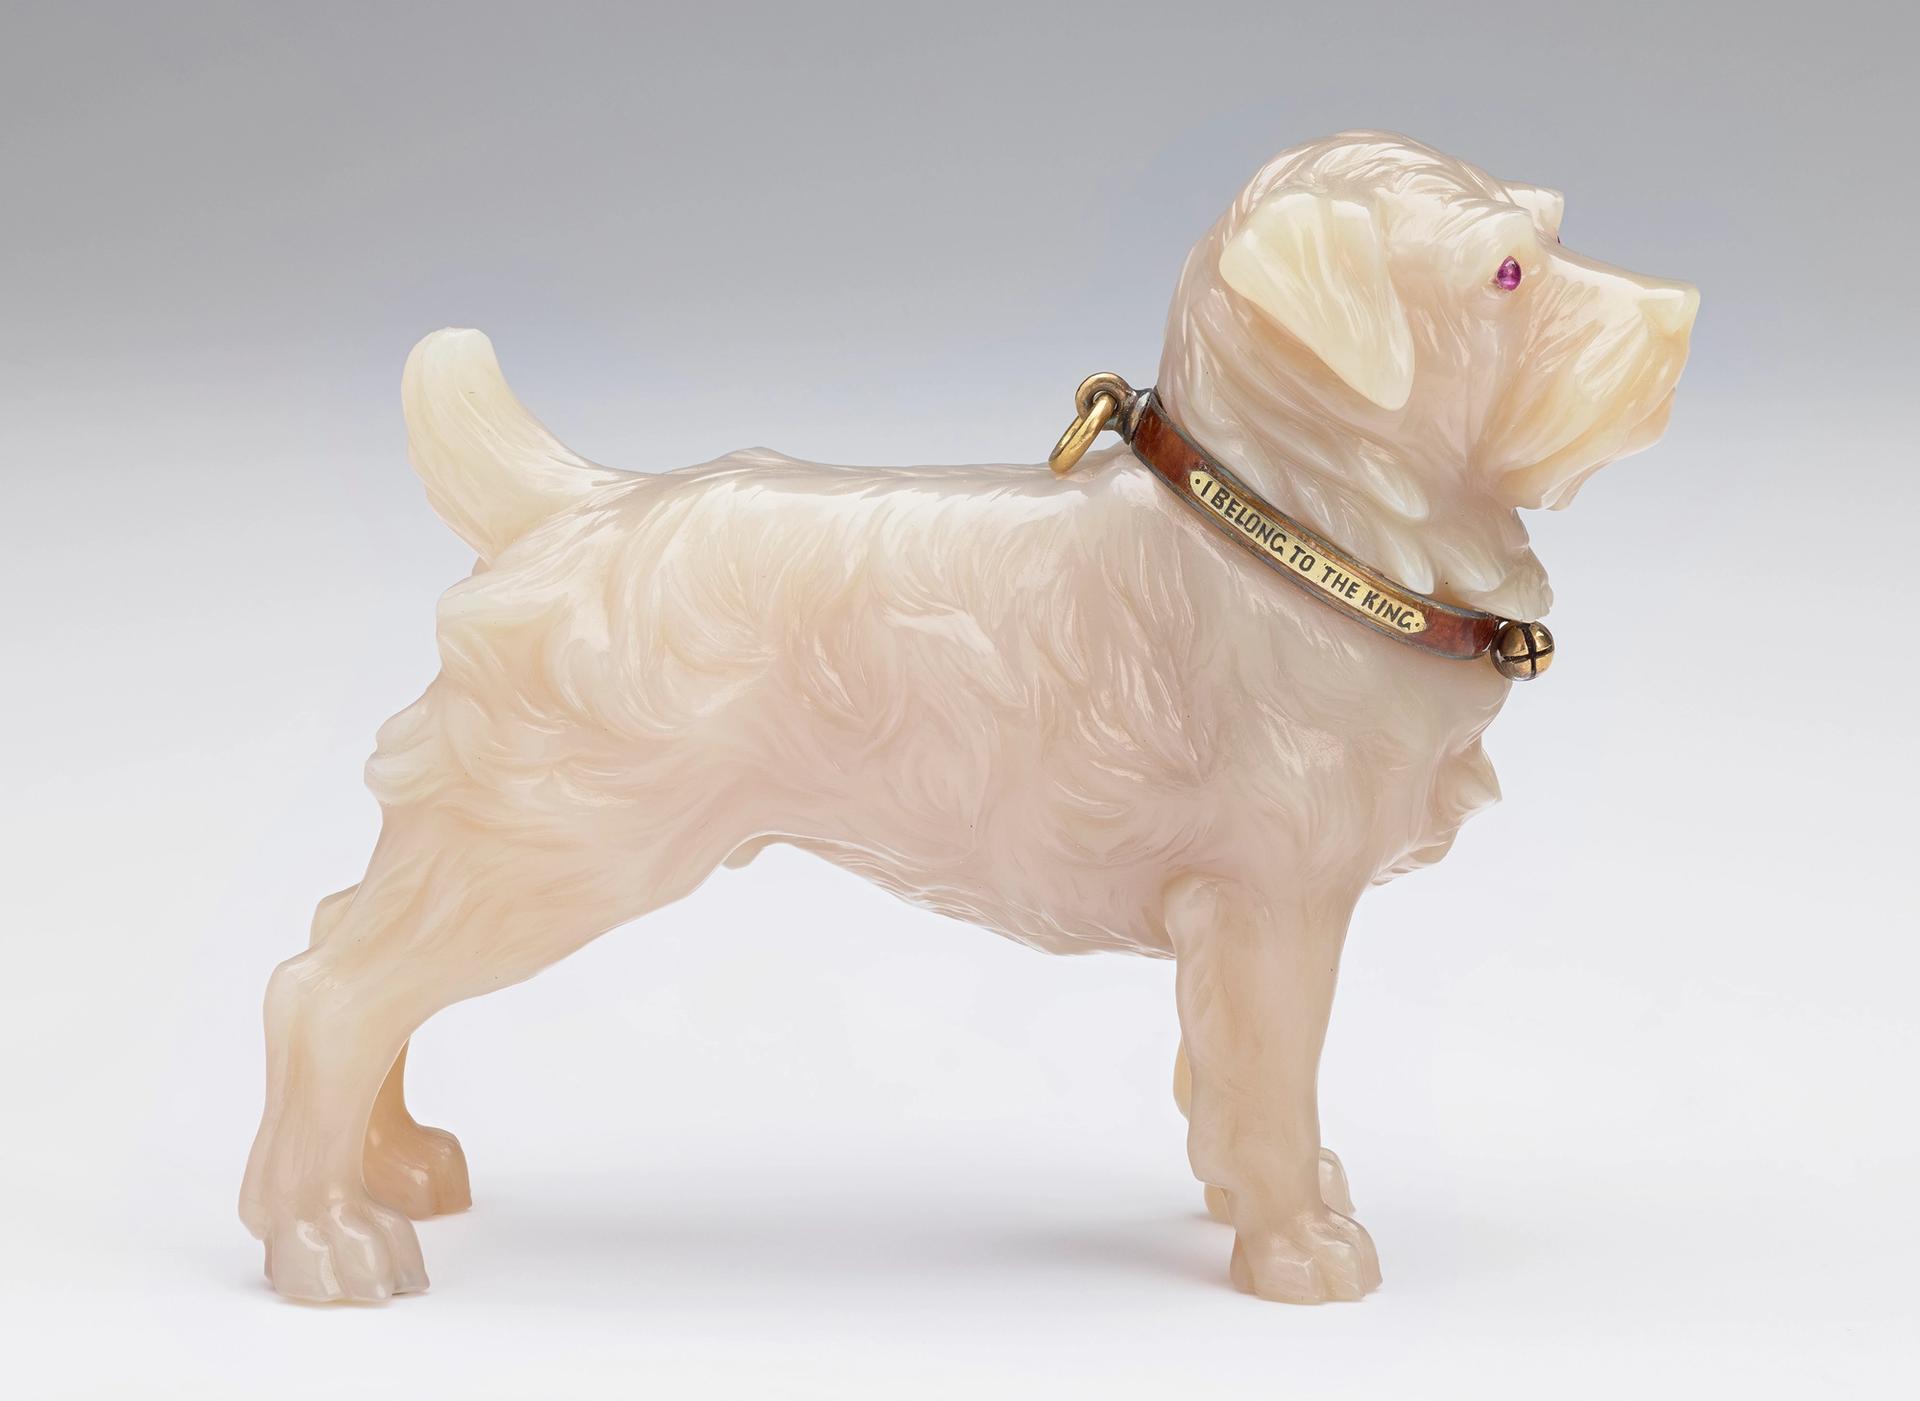 "I belong to the King": Fabergé modelled King Edward VII's favourite fox terrier, Caesar, in chalcedony with eyes of ruby, in around 1908. Royal Collection Trust © Her Majesty Queen Elizabeth II 2021